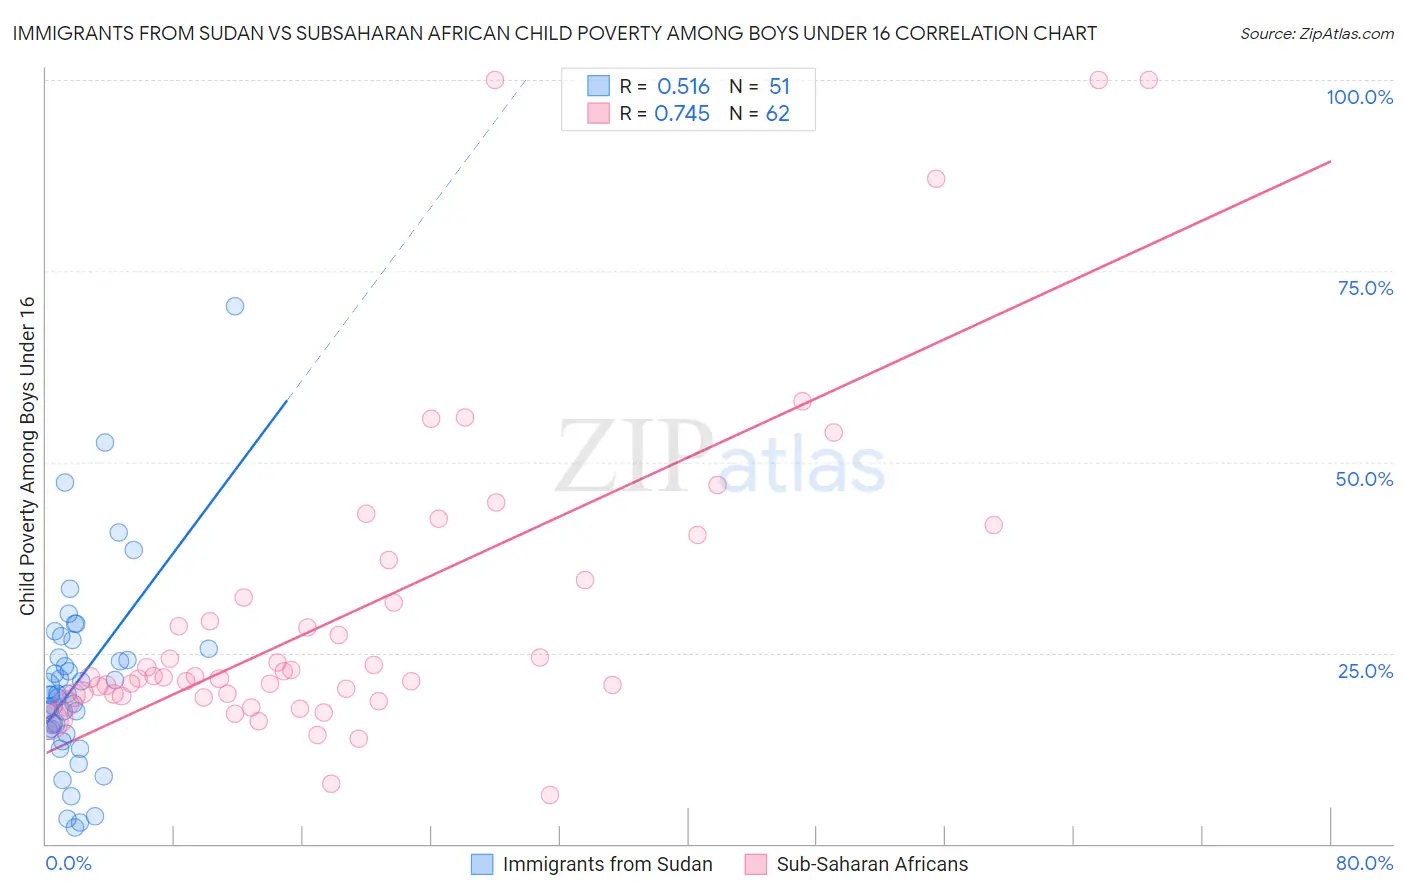 Immigrants from Sudan vs Subsaharan African Child Poverty Among Boys Under 16